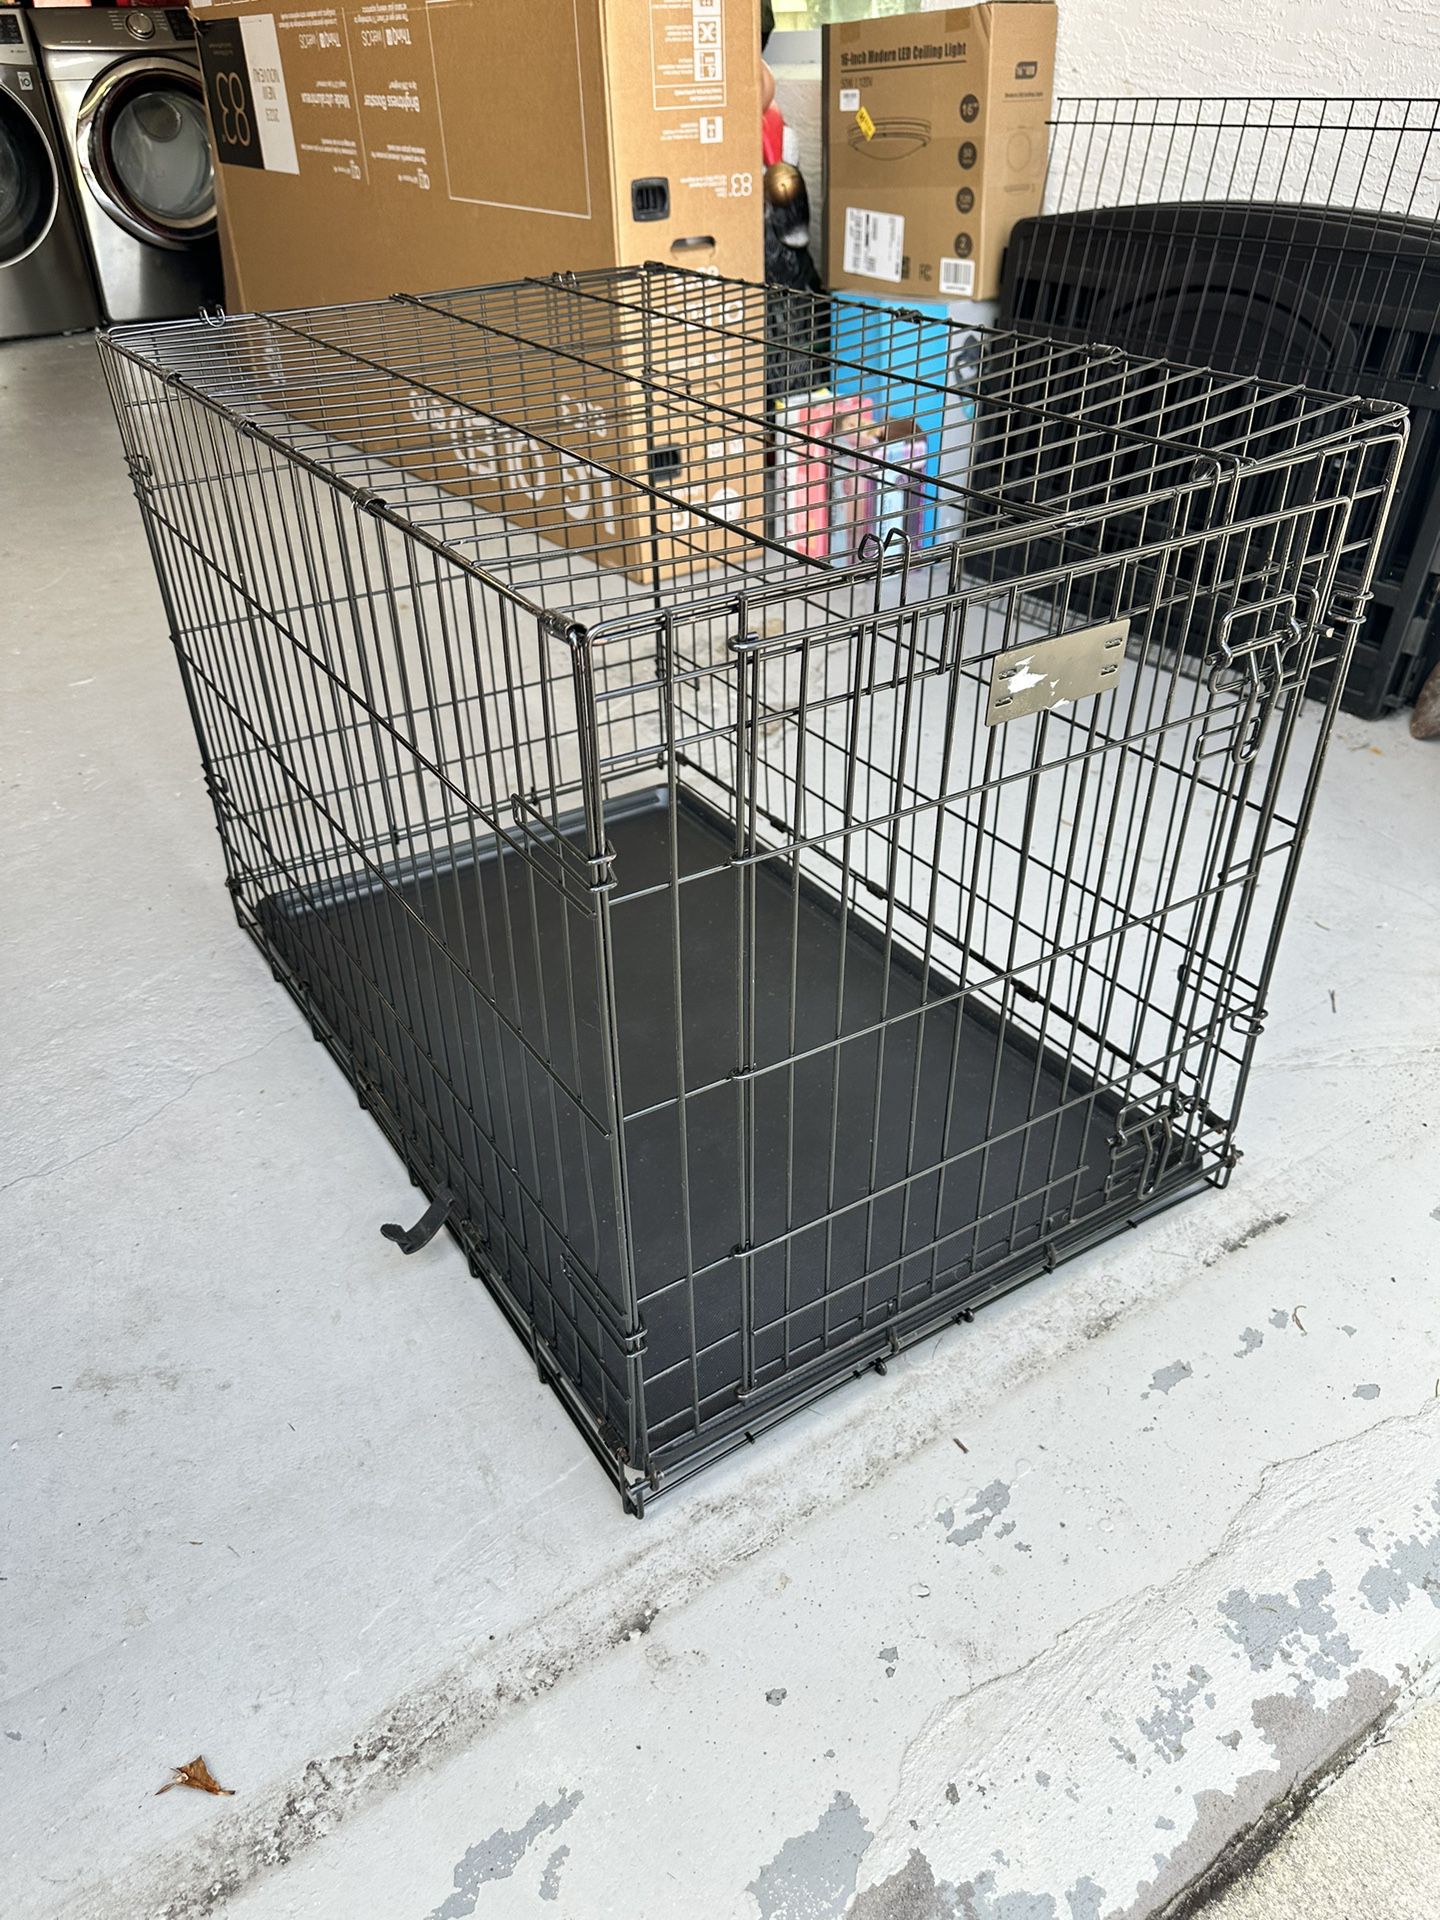 Large Dog Crate With Divider